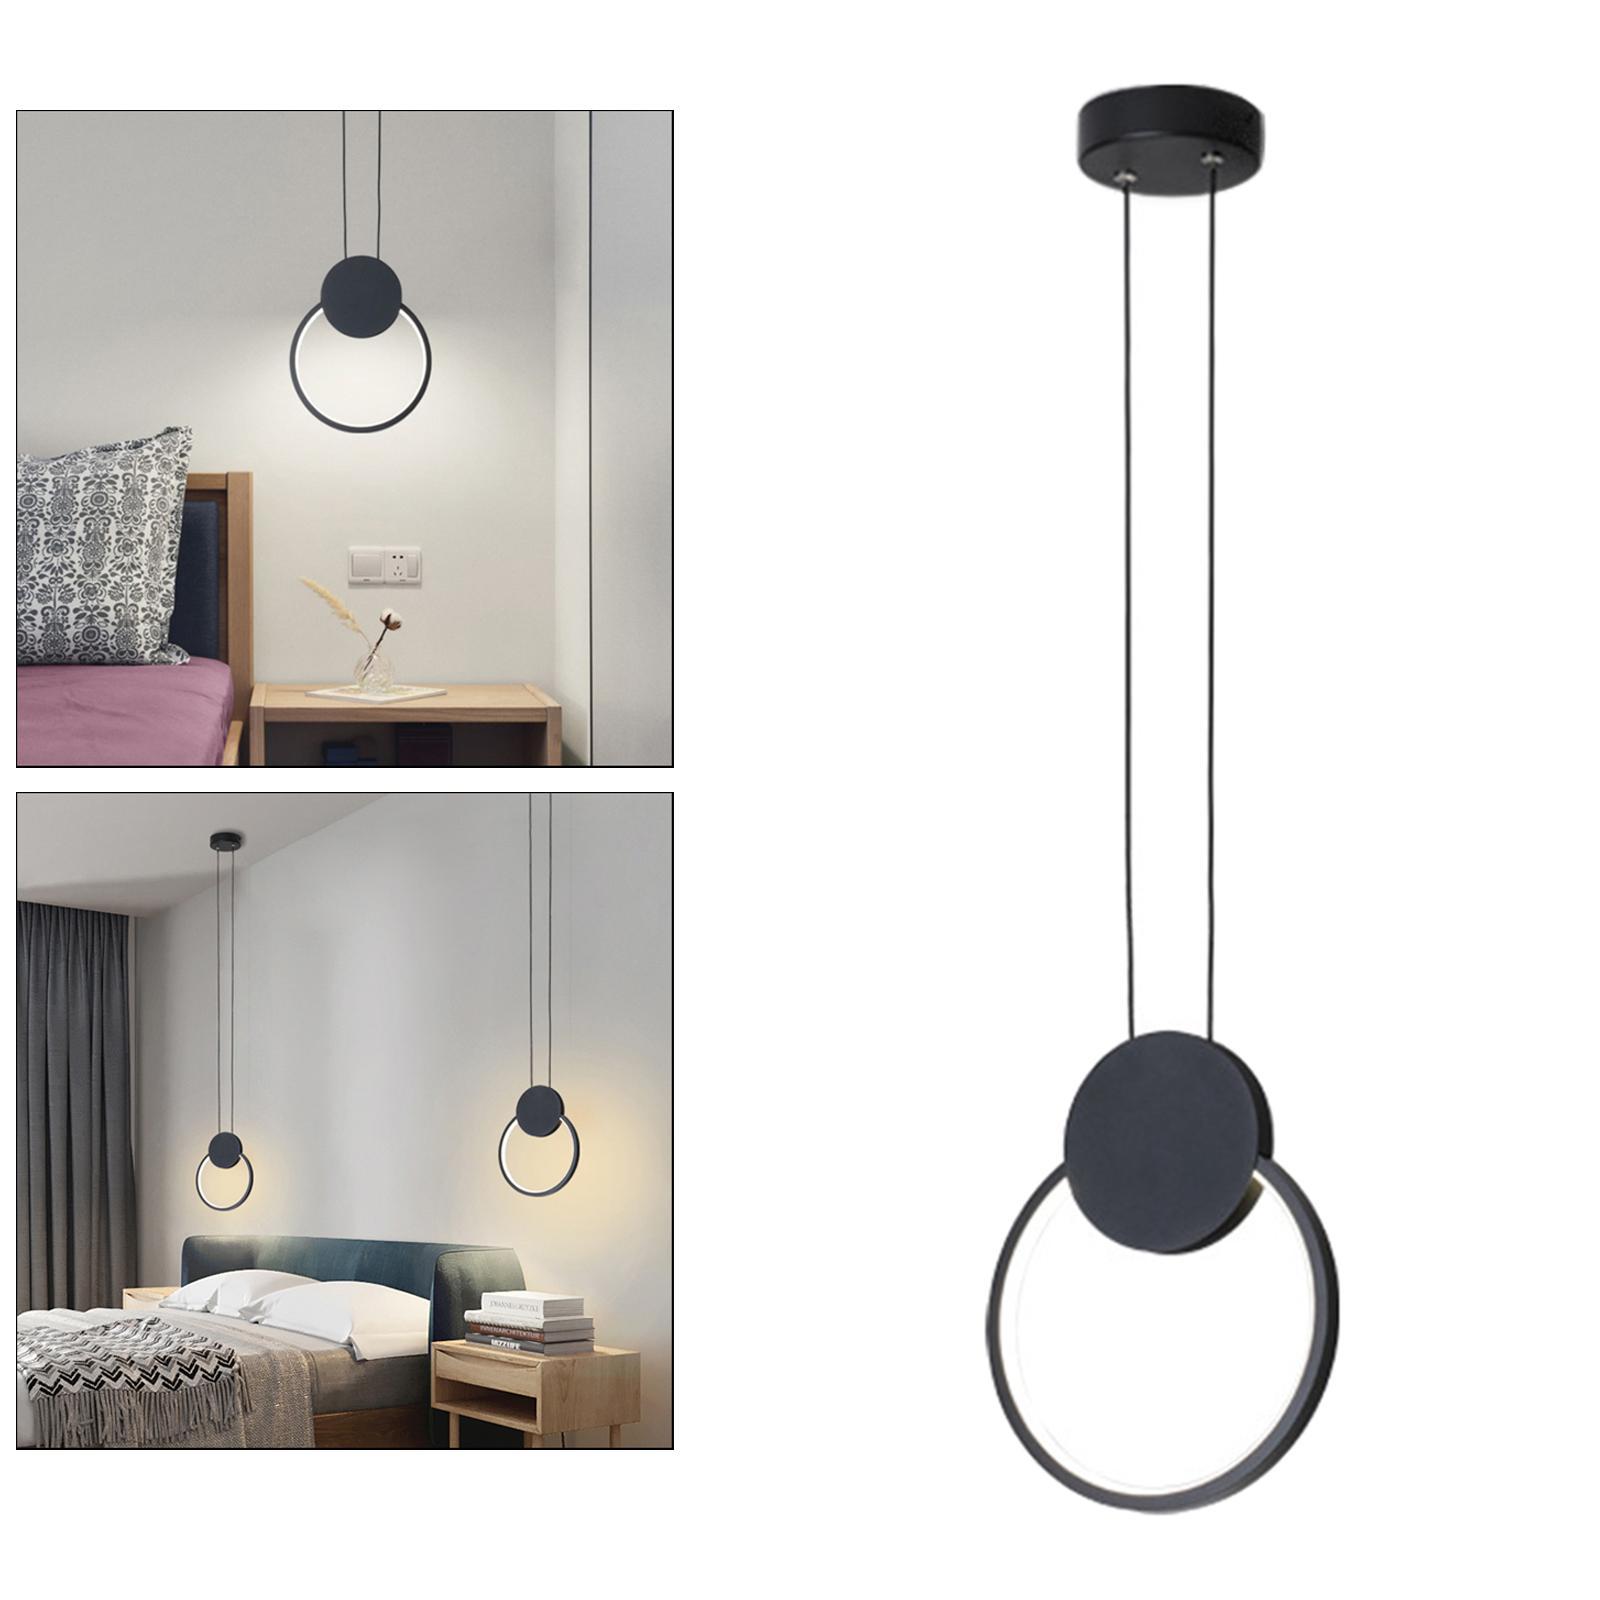 Minimalist Metal Pendant Hanging Light Dimmable Bedroom Dining Room Round